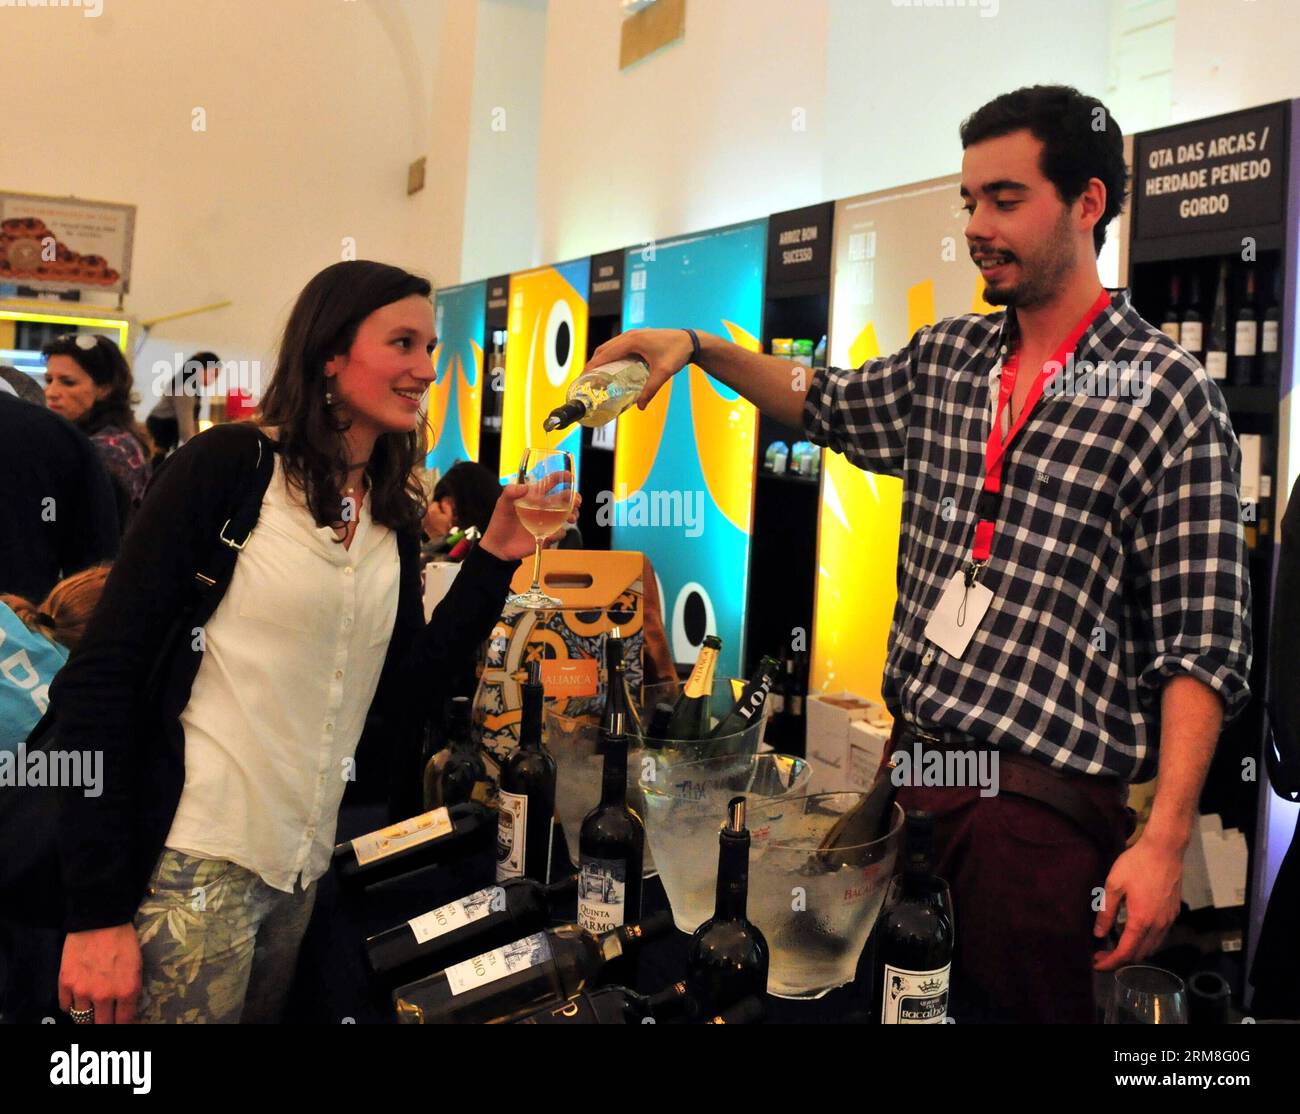 A visitor tastes Portuguese wine during the Lisbon Fish and Flavours Festival in Lisbon, Portugal, on April 12, 2014. The festival is held from April 3 to April 13. (Xinhua/Zhang Liyun) PORTUGAL-LISBON-FISH AND FLAVOURS-FESTIVAL PUBLICATIONxNOTxINxCHN   a Visitor Tastes PORTUGUESE Wine during The Lisbon Fish and Lambkin flavors Festival in Lisbon Portugal ON April 12 2014 The Festival IS Hero from April 3 to April 13 XINHUA Zhang Liyun Portugal Lisbon Fish and Lambkin flavors Festival PUBLICATIONxNOTxINxCHN Stock Photo